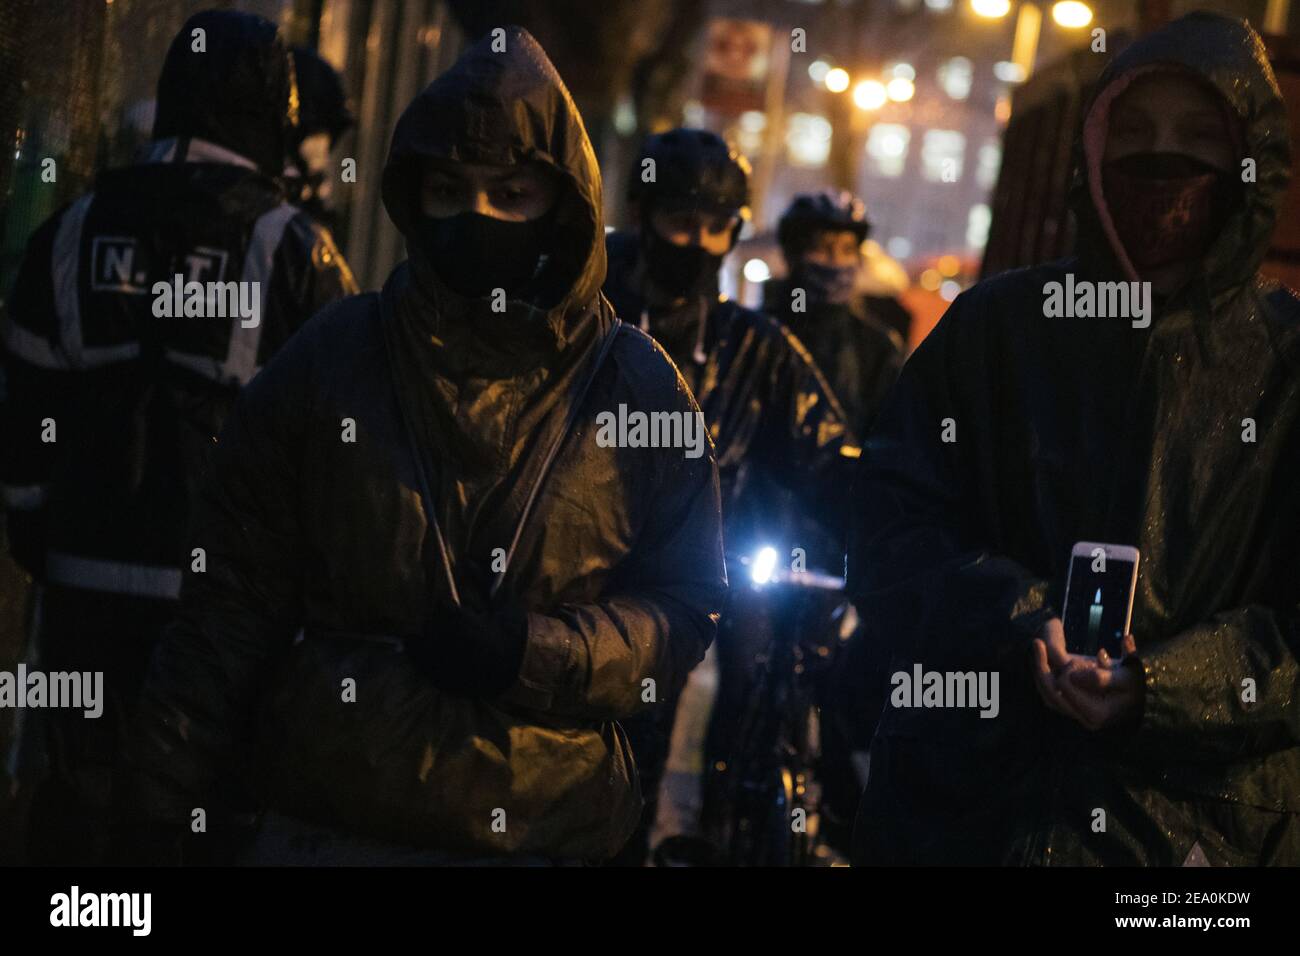 London, UK. 6th February, 2021. Candlelit vigil in remembrence of the lost trees at Euston Square, London as part of the Stop HS2 protest February 6th 2021. Women carry candles as the NET working for HS2 look on Credit: Denise Laura Baker/Alamy Live News Stock Photo